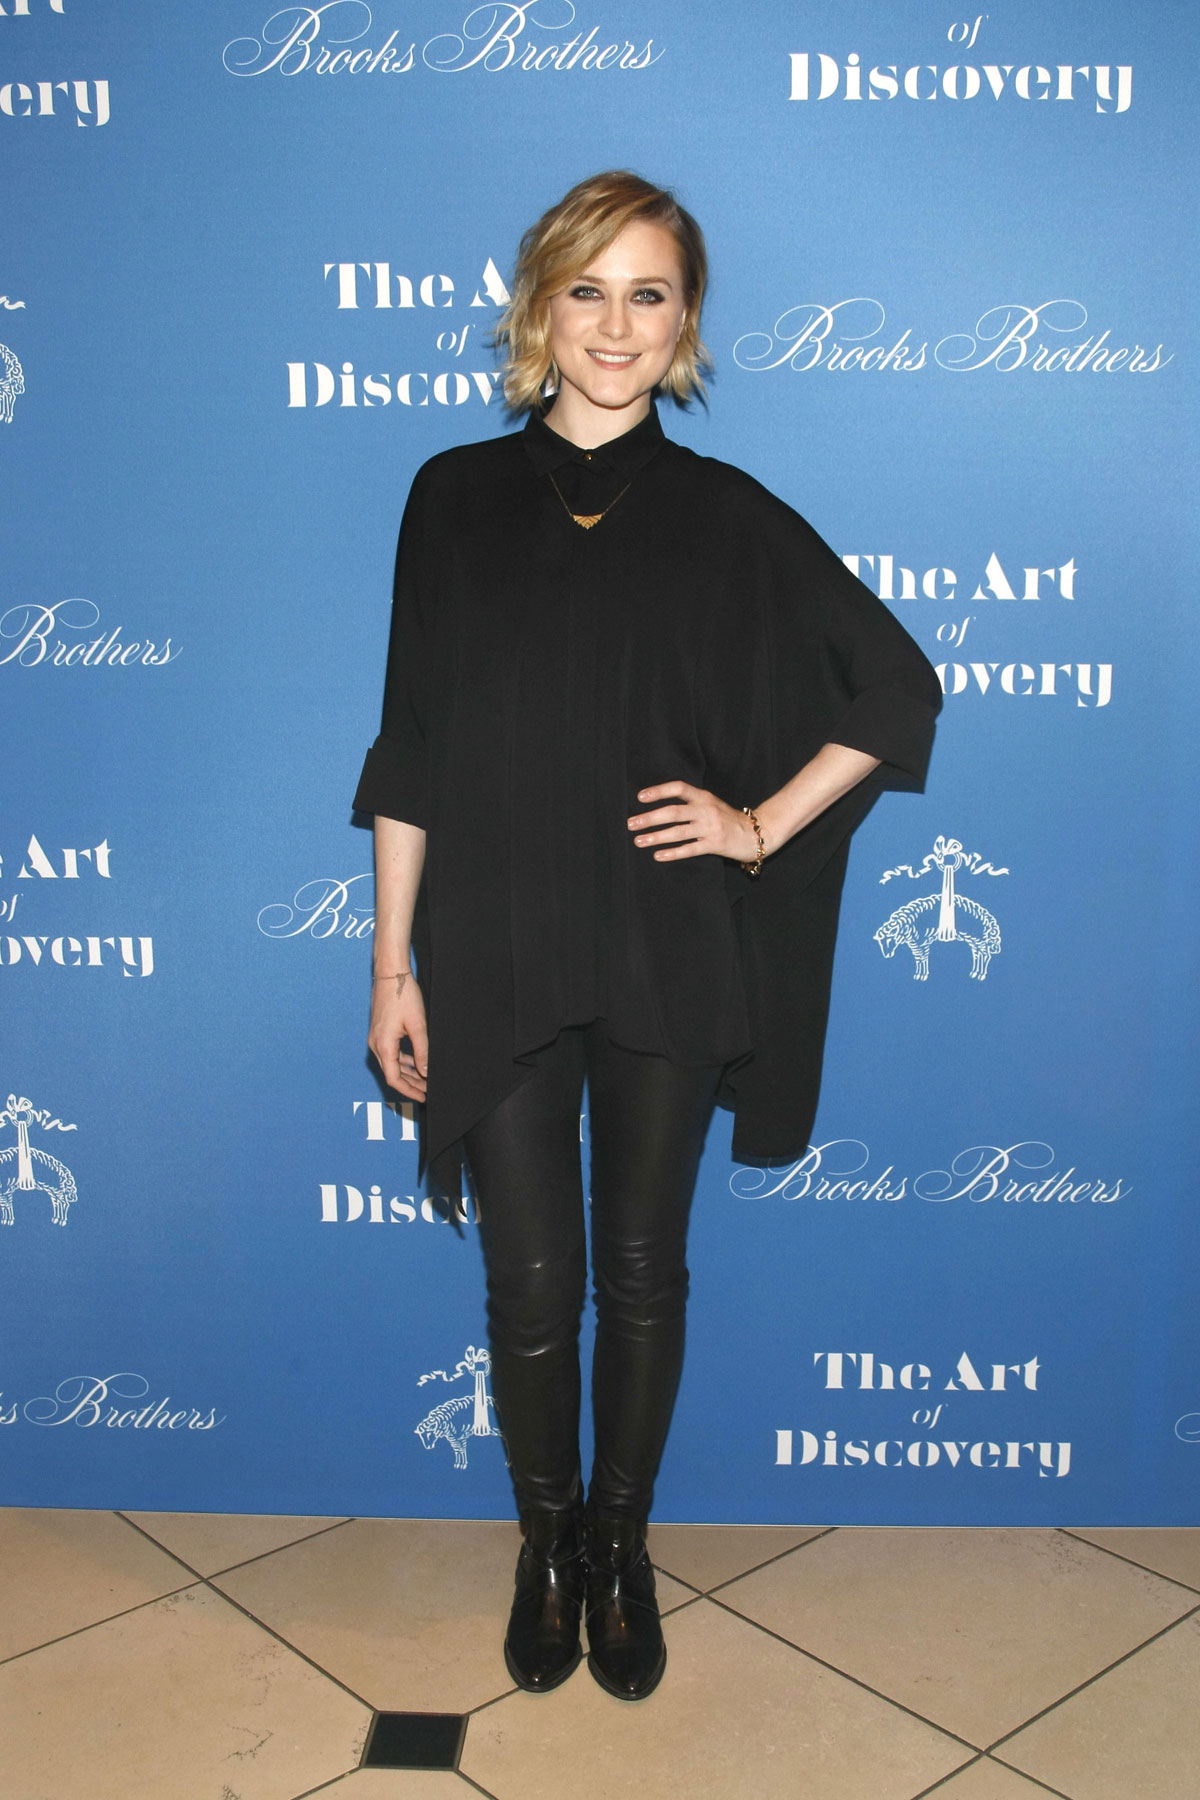 Evan Rachel attends the launch of Jeff Vespa‘s new book “The Art of Discovery”